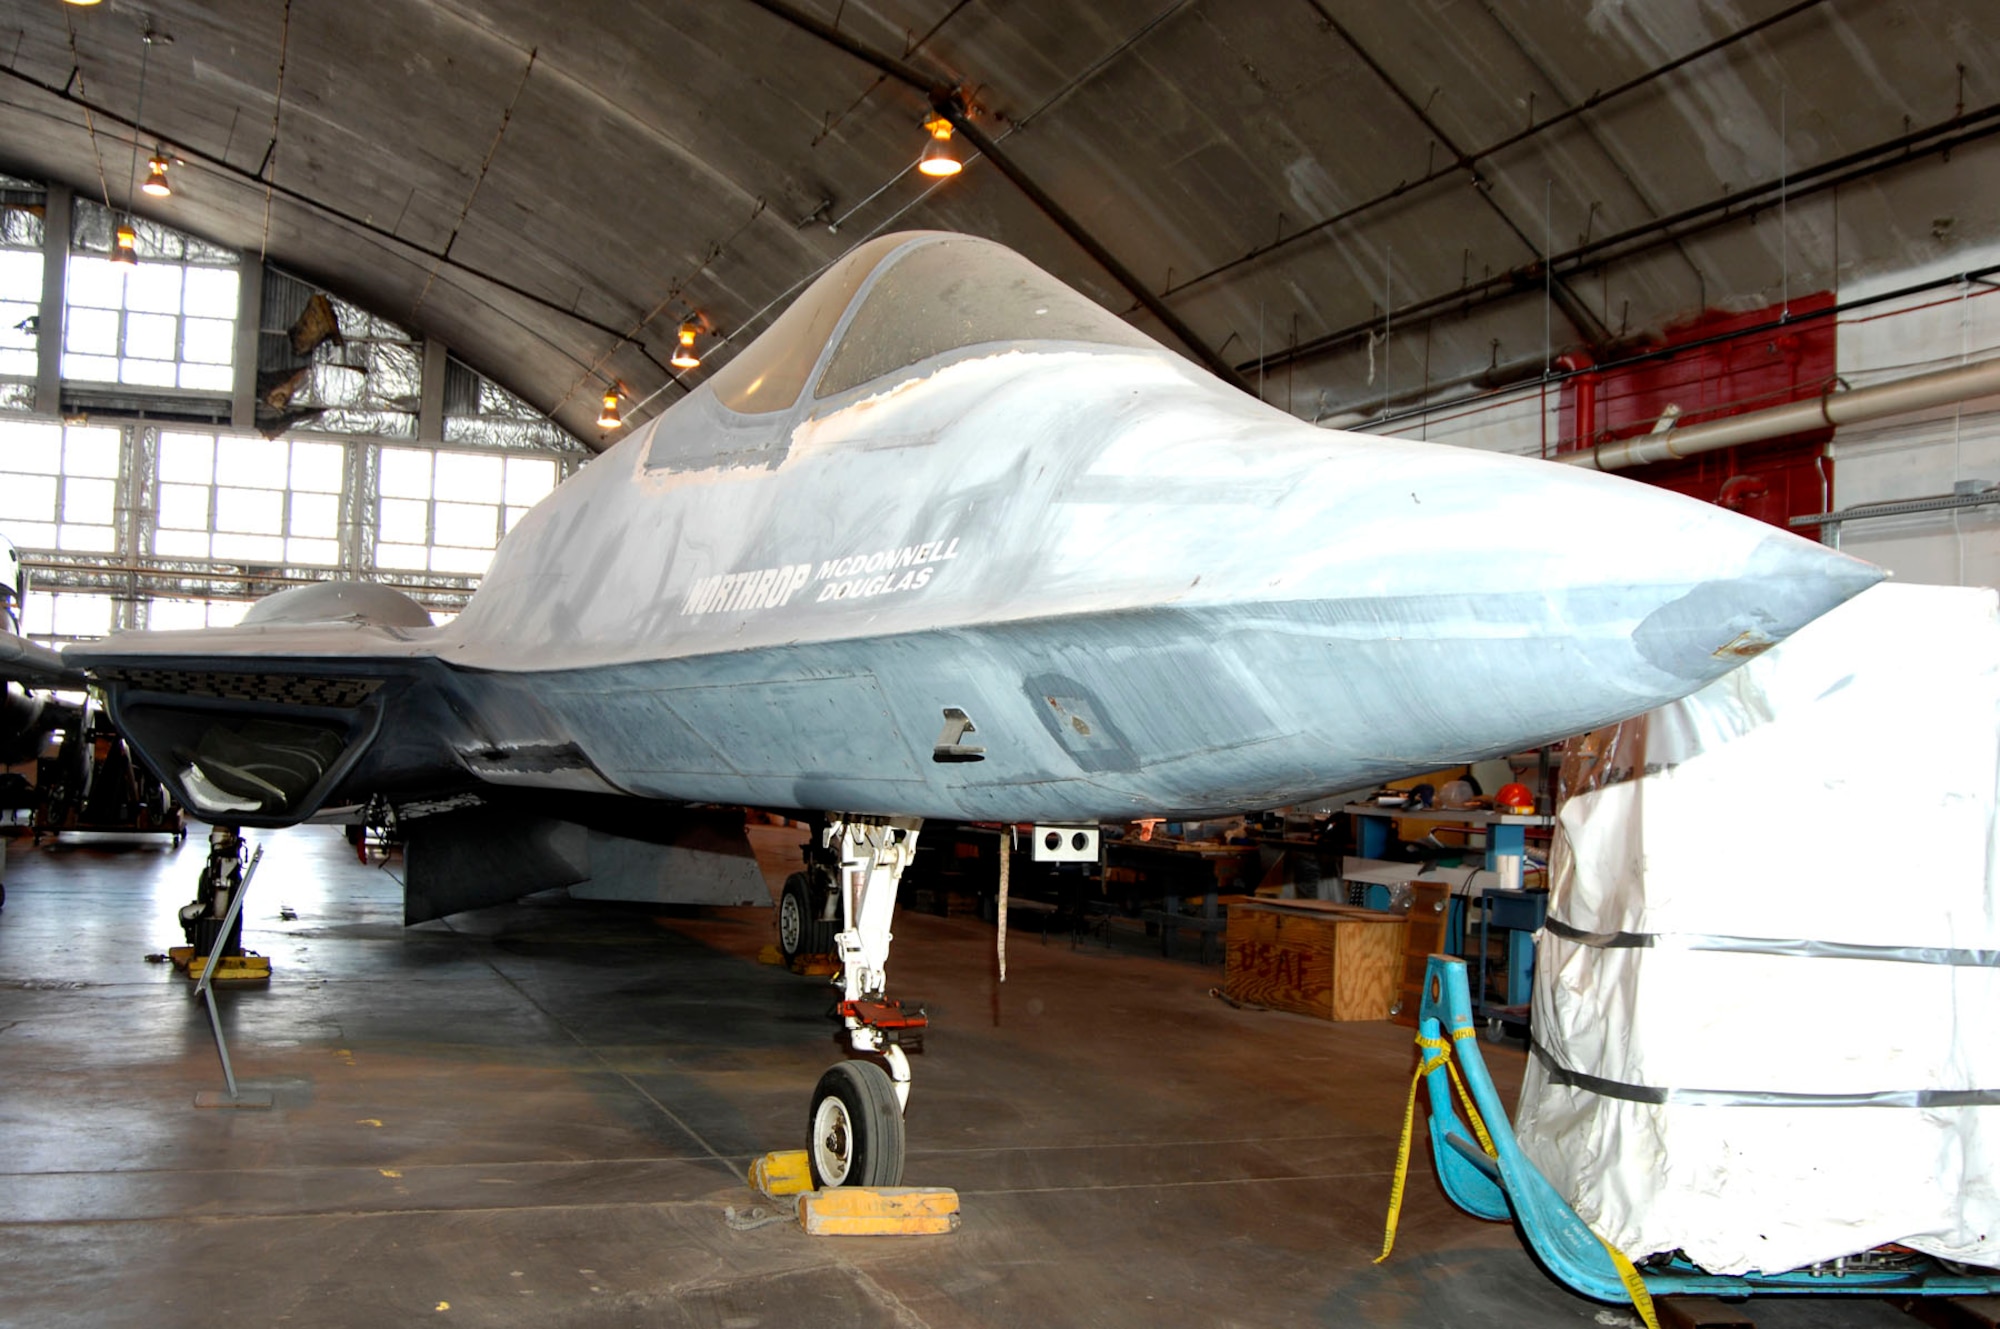 DAYTON, Ohio (02/2007) -- Northrop-McDonnell Douglas YF-23 in the restoration area of the National Museum of the U.S. Air Force. (U.S. Air Force photo by Ben Strasser)